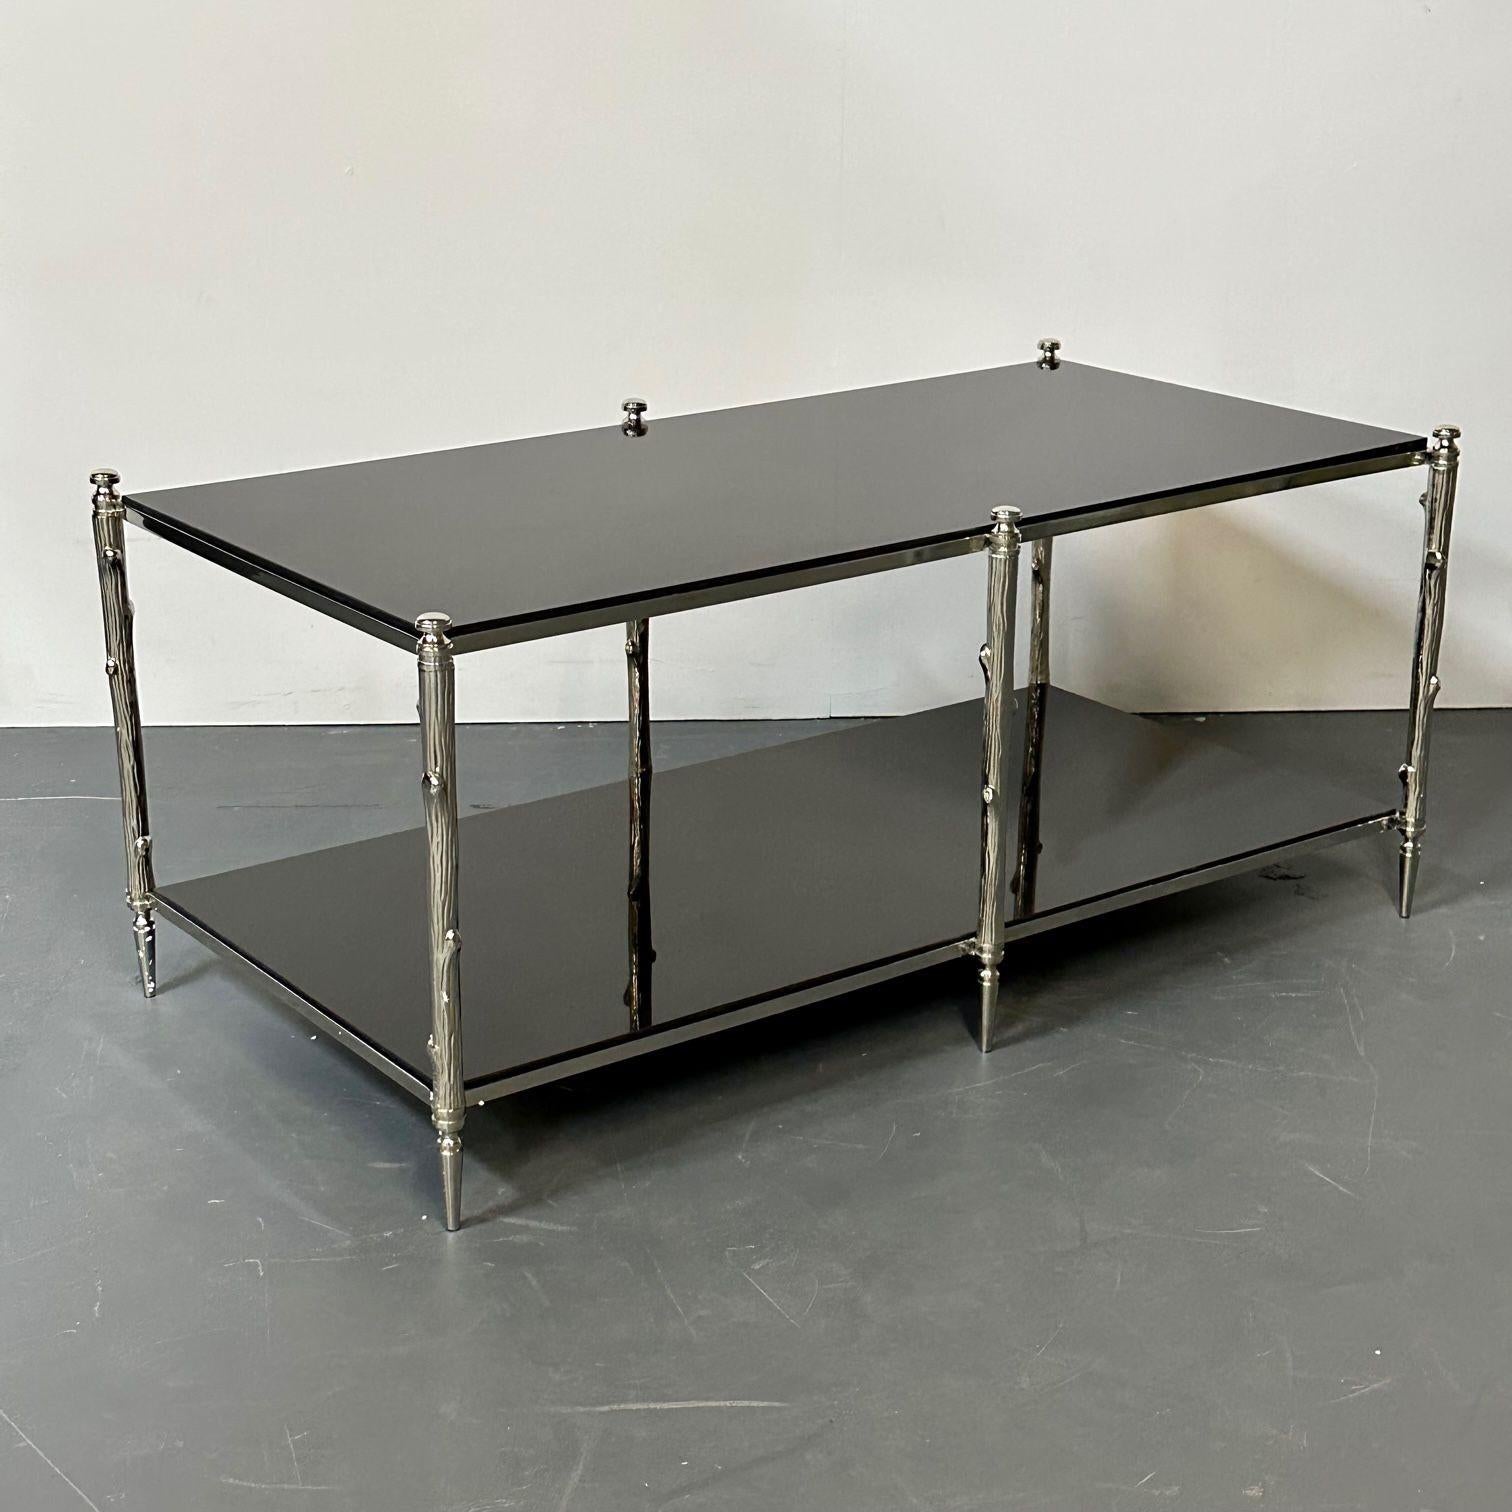 Modern Two Tier Maison Bagues Style Coffee / Low Table, Black Granite In Good Condition For Sale In Stamford, CT